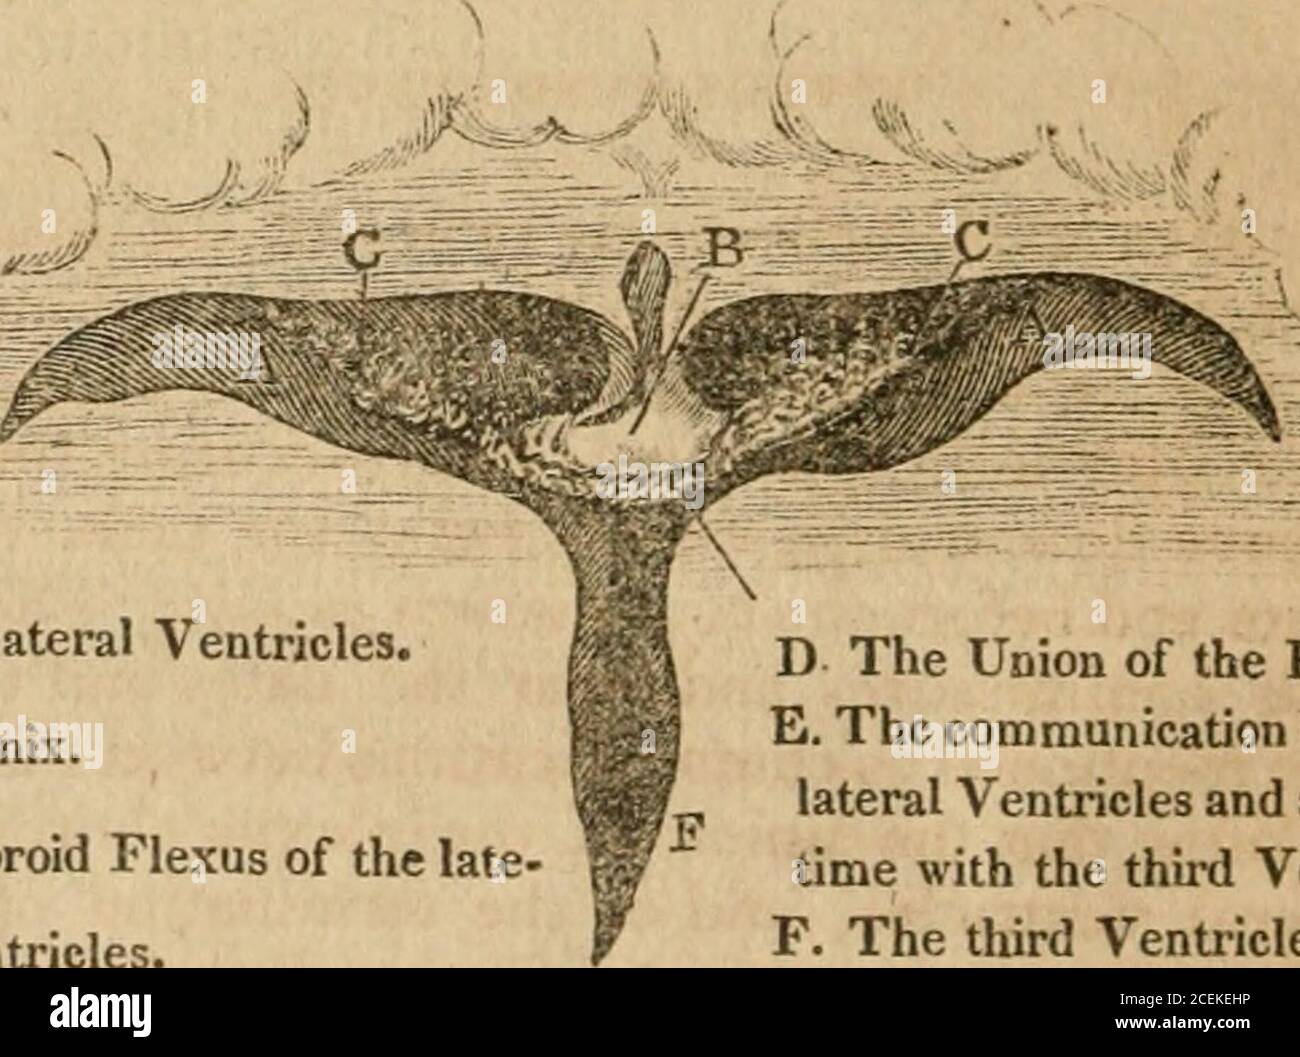 . The anatomy and physiology of the human body. Containing the anatomy of the bones, muscles, and joints; and the heart and arteries. ^M. A. A. The lateral Ventricles. B. The Fornix. C. The Choroid Flexus of the late- ral Ventricles. D The Union of the Plexus, E. The communication betwixt thelateral Ventricles and at the sametime with the third Ventricle. F. The third Ventricle. The third ventricle opens forward and upwards into the twolateral ventricles, and under the common communication itopens into the infundibulum. Backwards it is continued by acanal which passes under the tubercula quadr Stock Photo